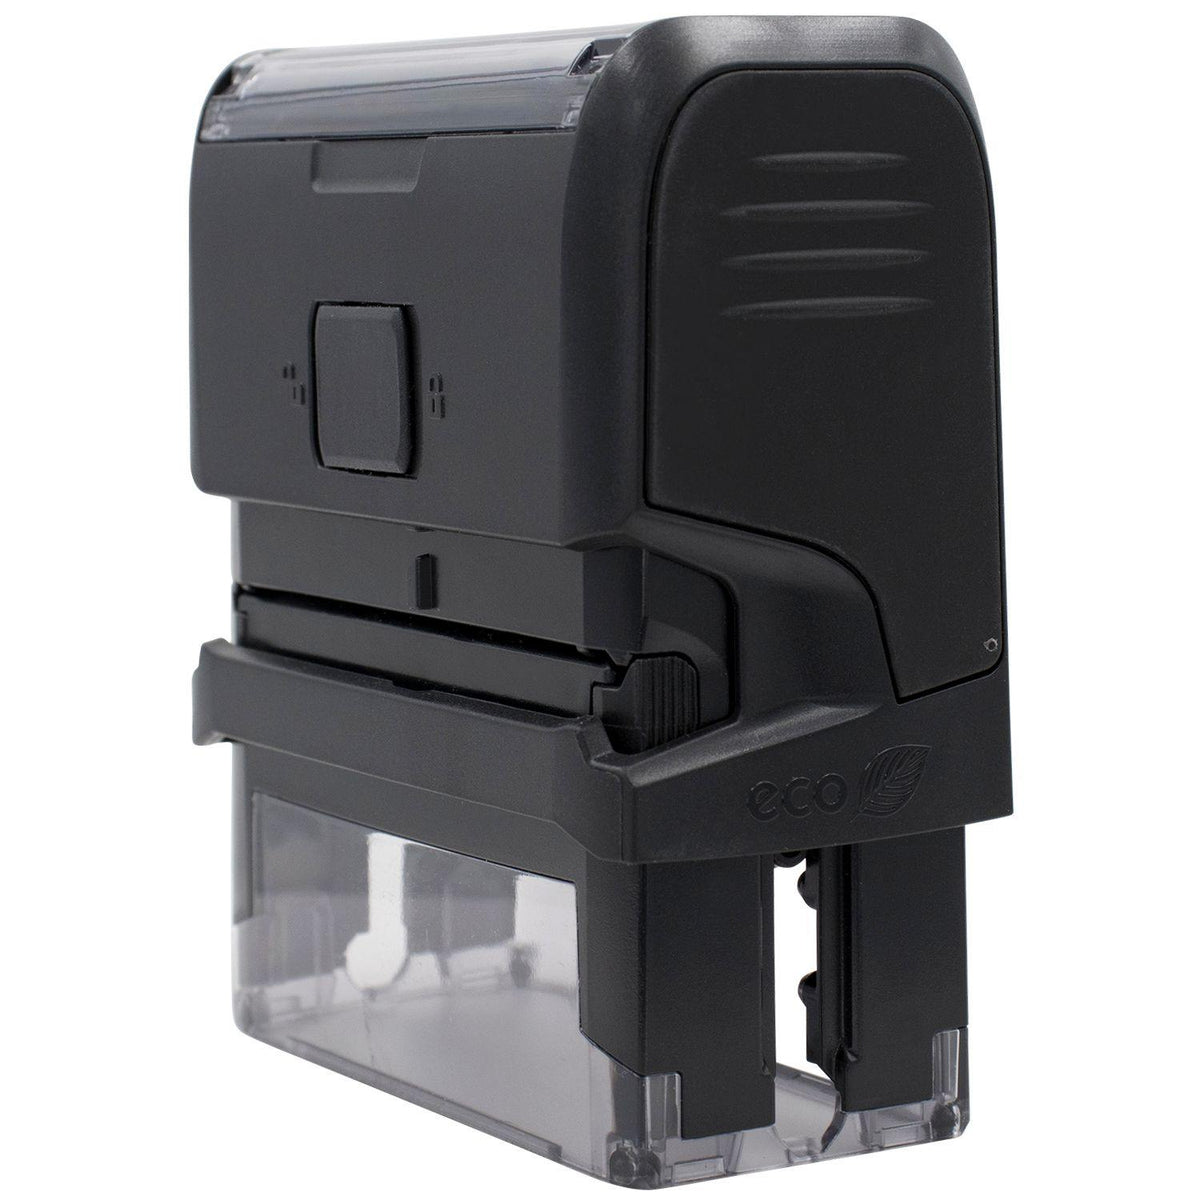 Large Self-Inking Curly Copy Stamp - Engineer Seal Stamps - Brand_Trodat, Impression Size_Large, Stamp Type_Self-Inking Stamp, Type of Use_General, Type of Use_Office